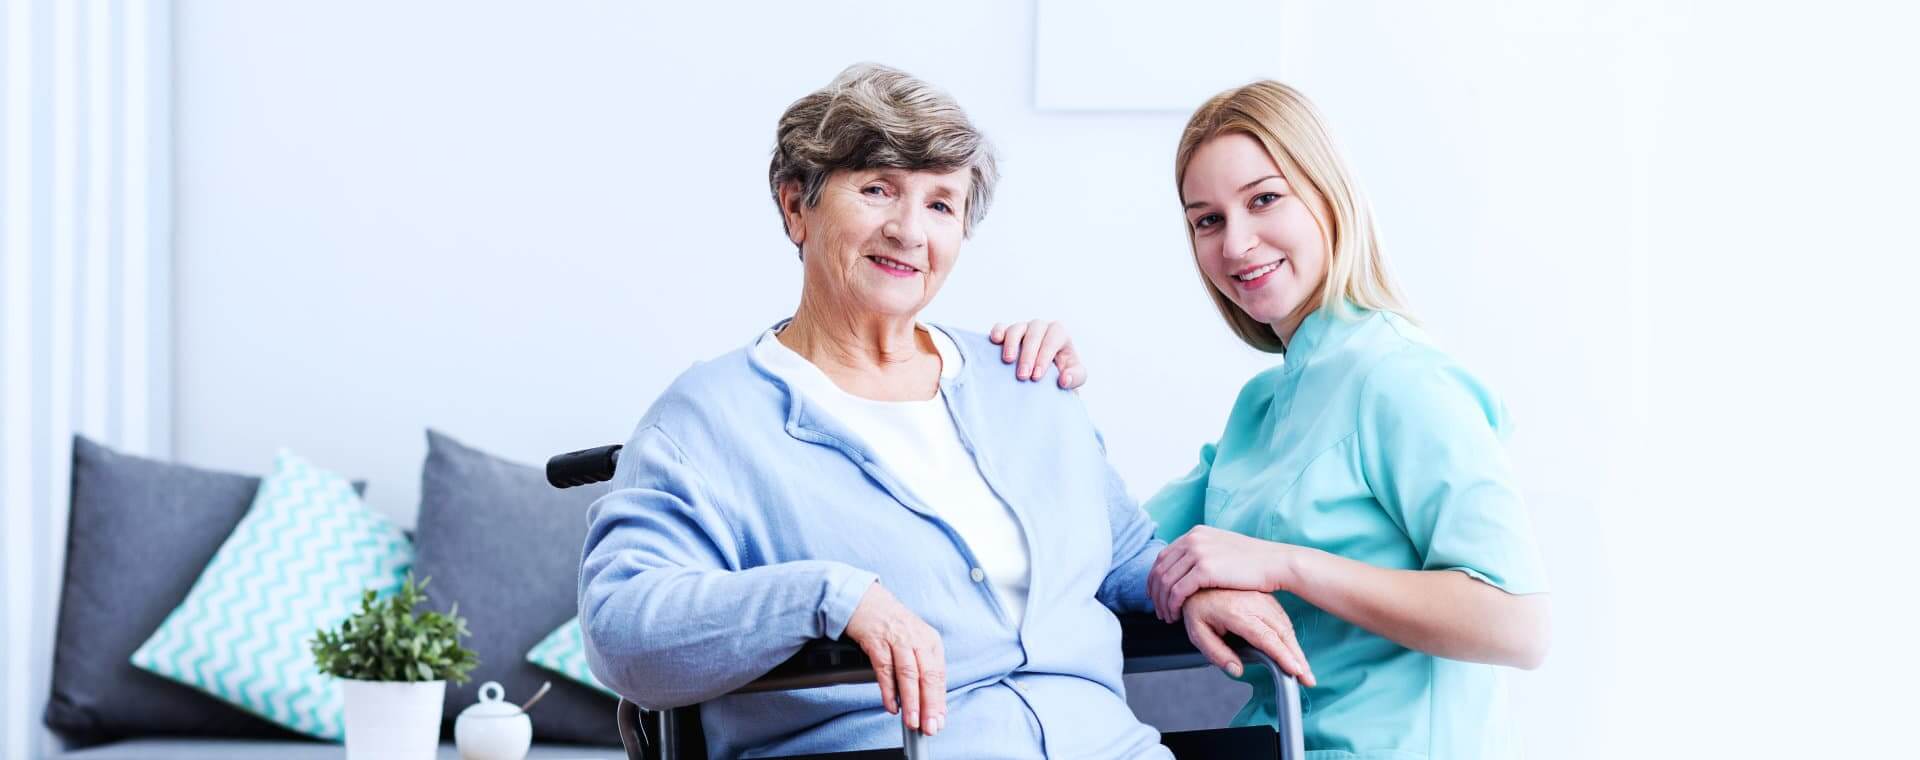 Caregiver holding the old womans hands while smiling